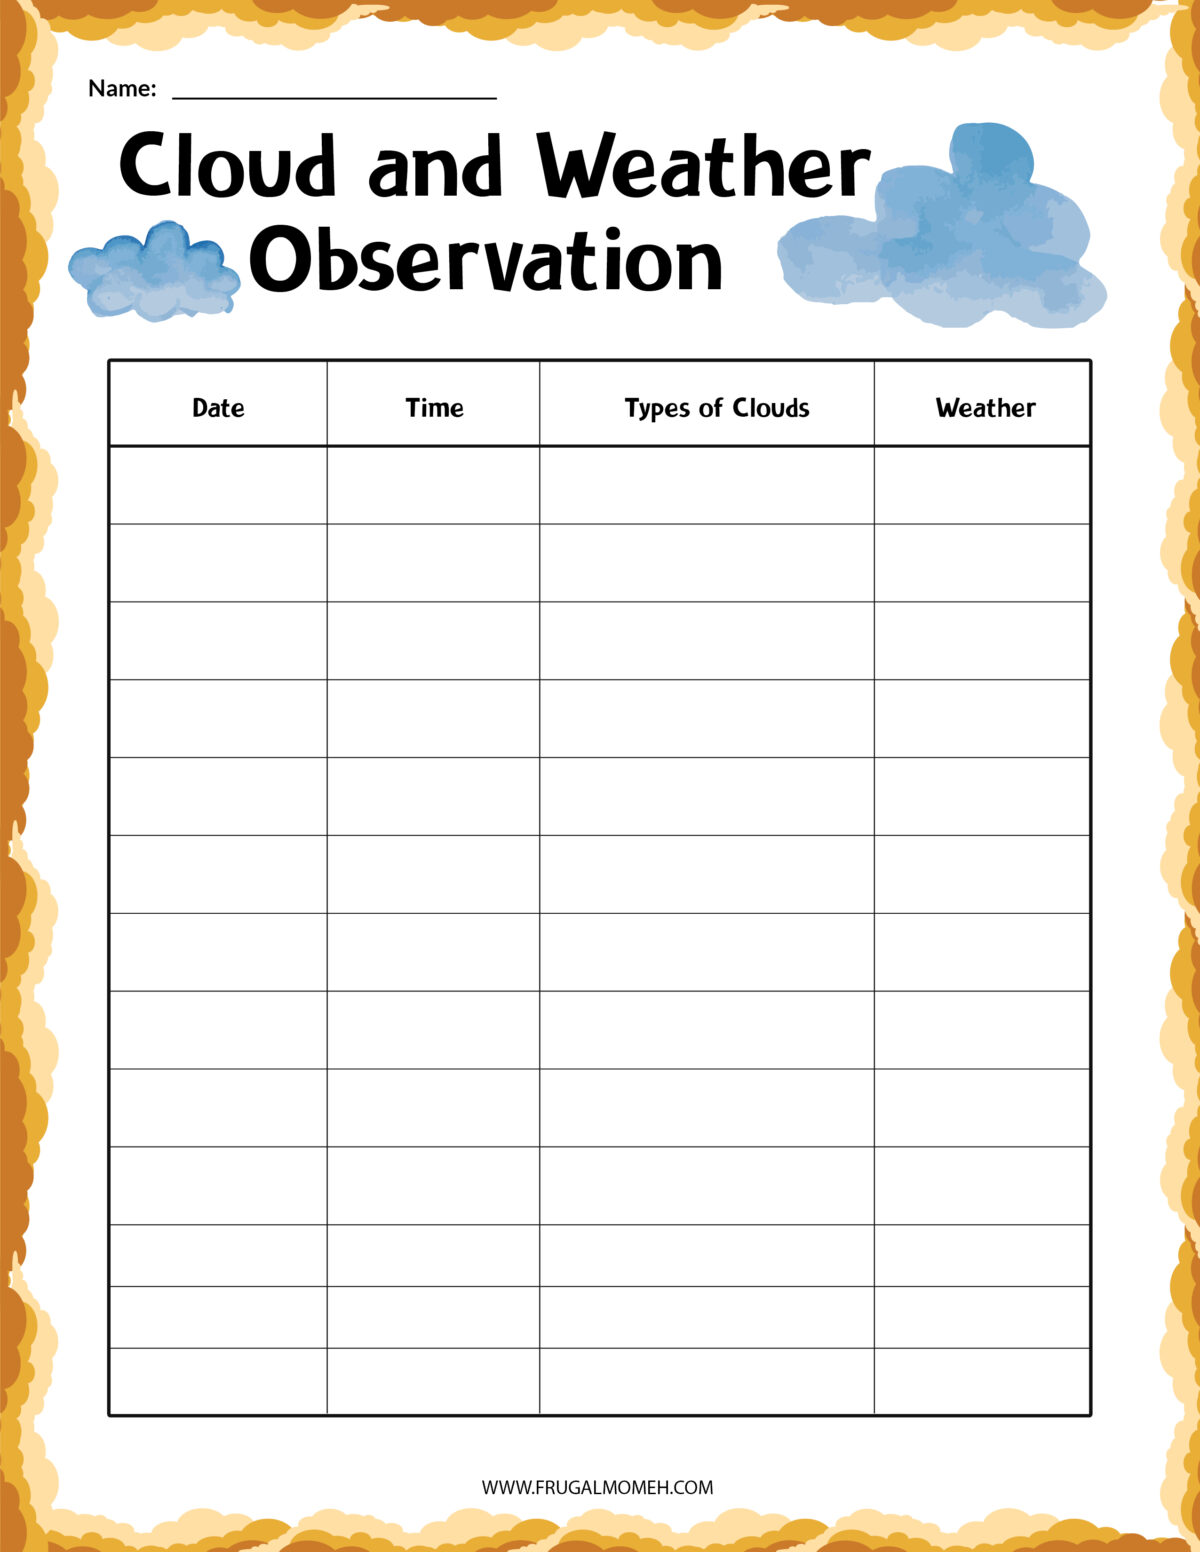 cl;oud and weather observation printable sheet.